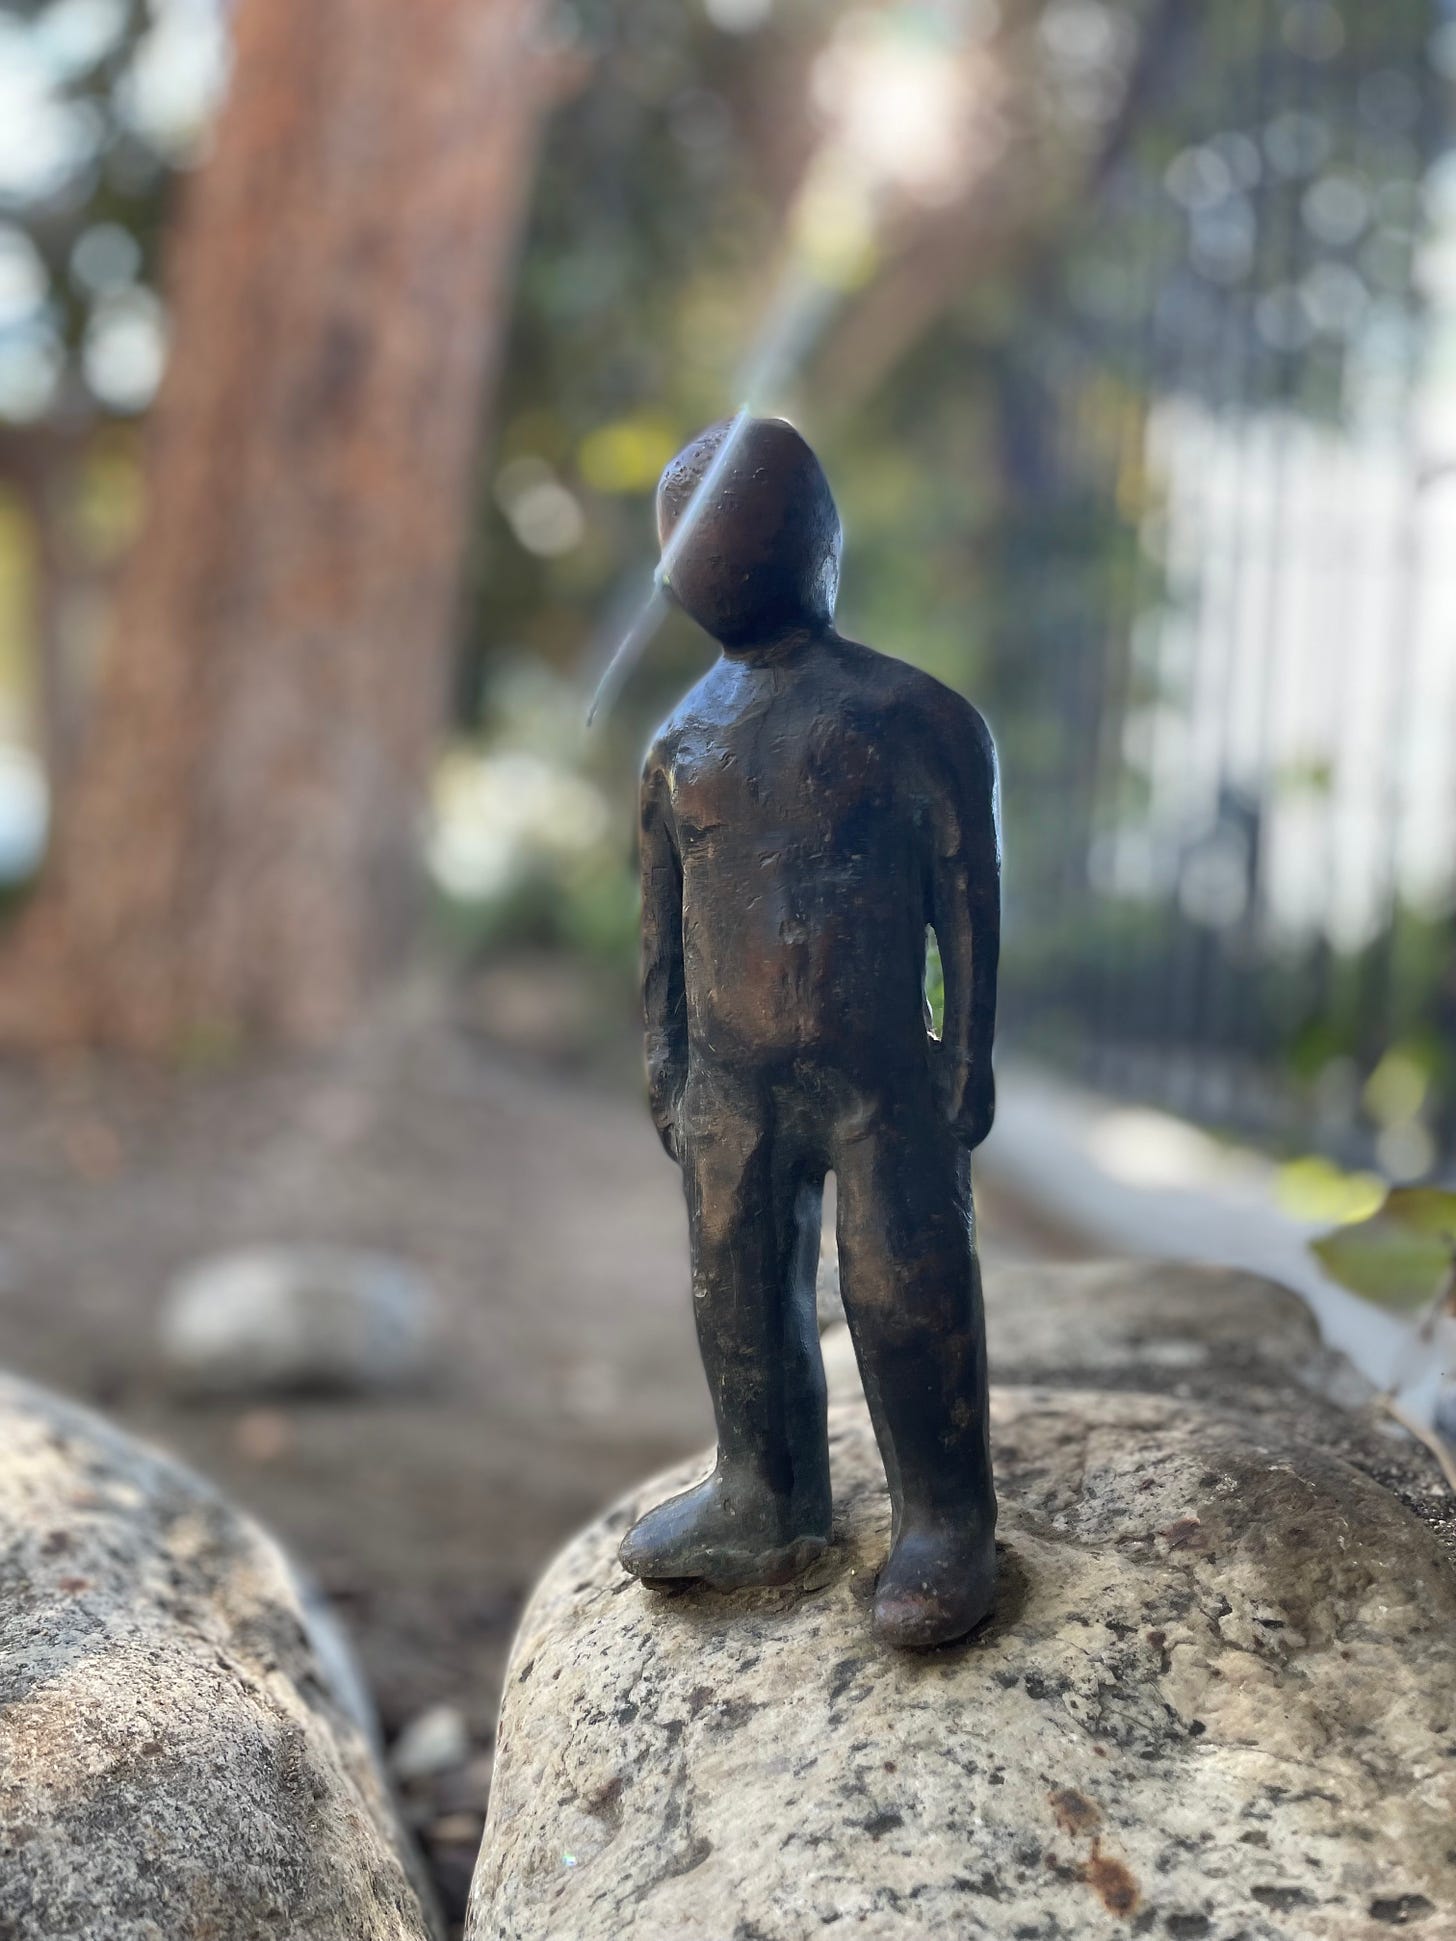 A picture of a small metal sculpture of a humanoid figure standing on a rock. There are blurred trees in the background. A small sunbeam is cutting across the statue's head from behind and shining through the front, like a burst of inspiration.